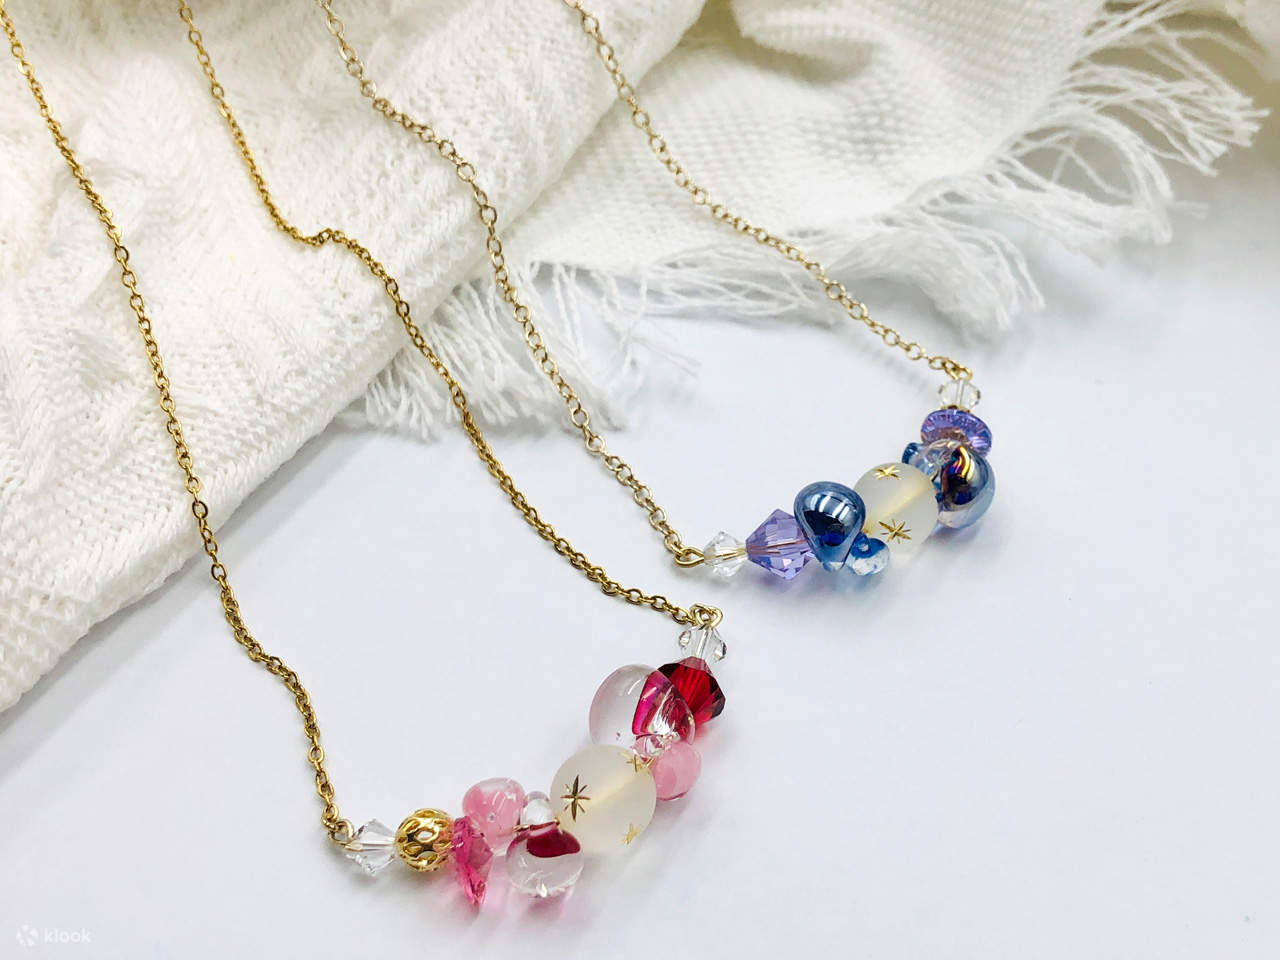 Crystal Necklaces for sale in Taichung, Taiwan | Facebook Marketplace |  Facebook